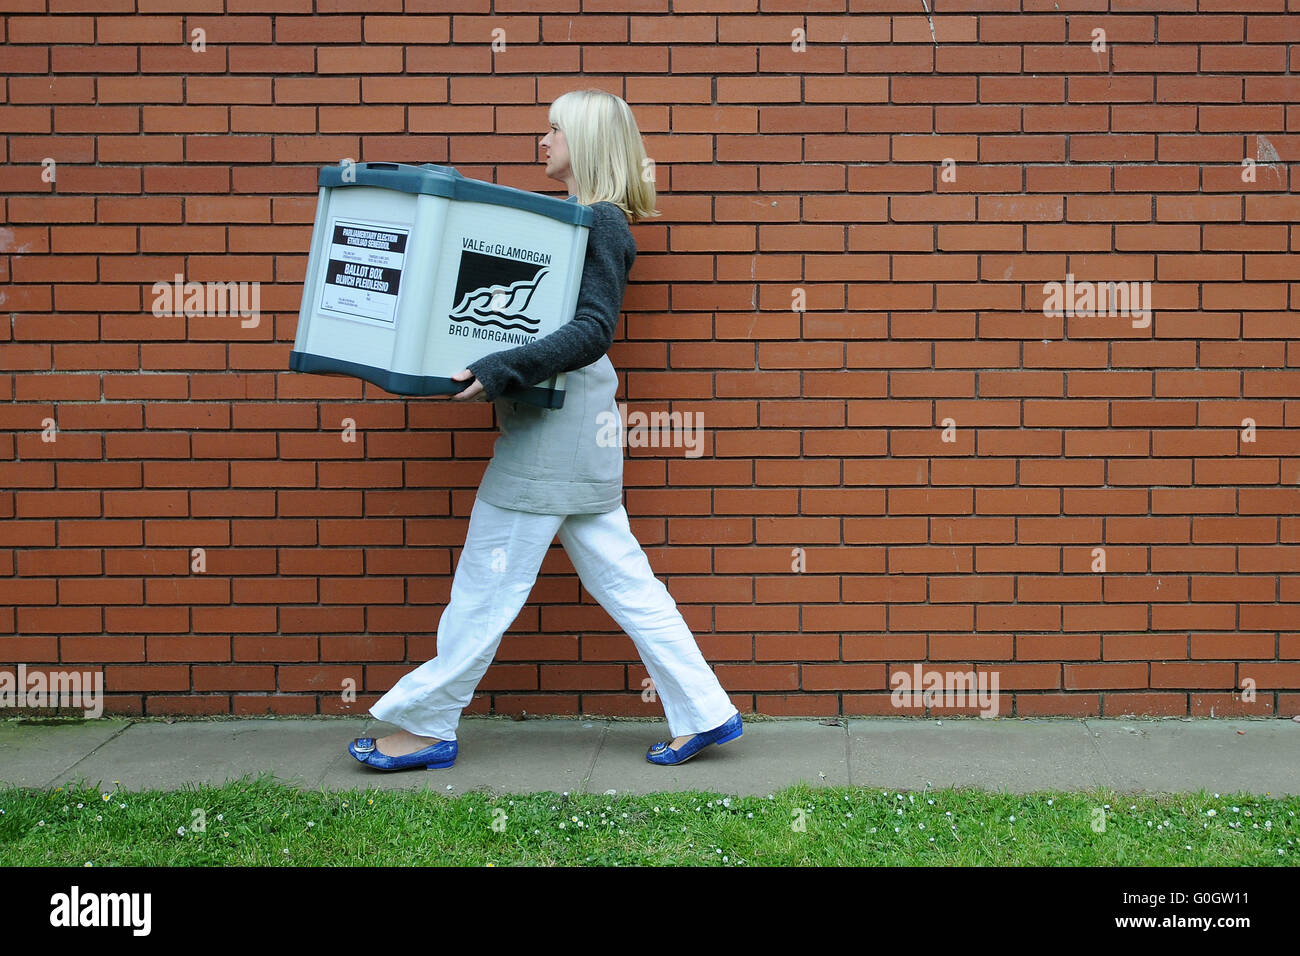 A council worker carries ballot boxes full of votes during the general election count in Barry, south Wales. Stock Photo